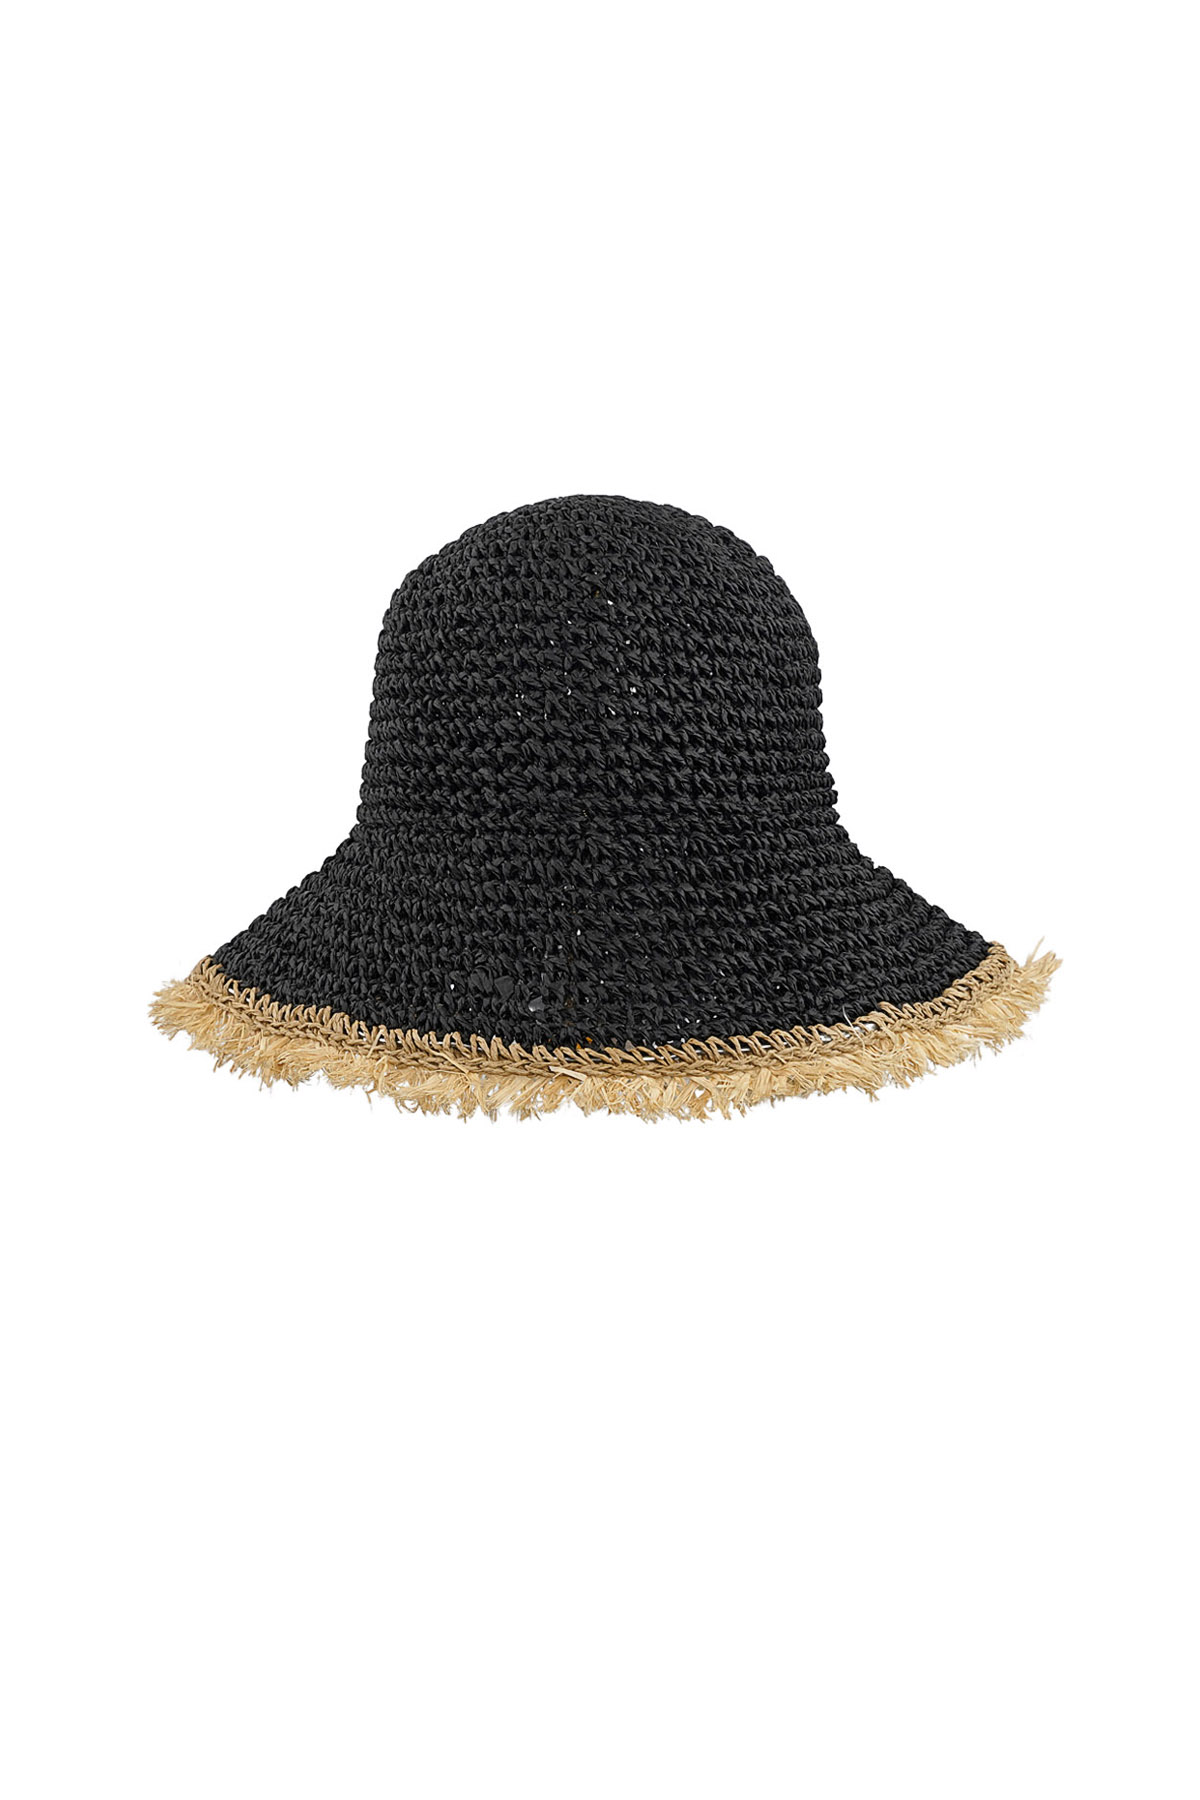 Hat with colored brim - black  h5 